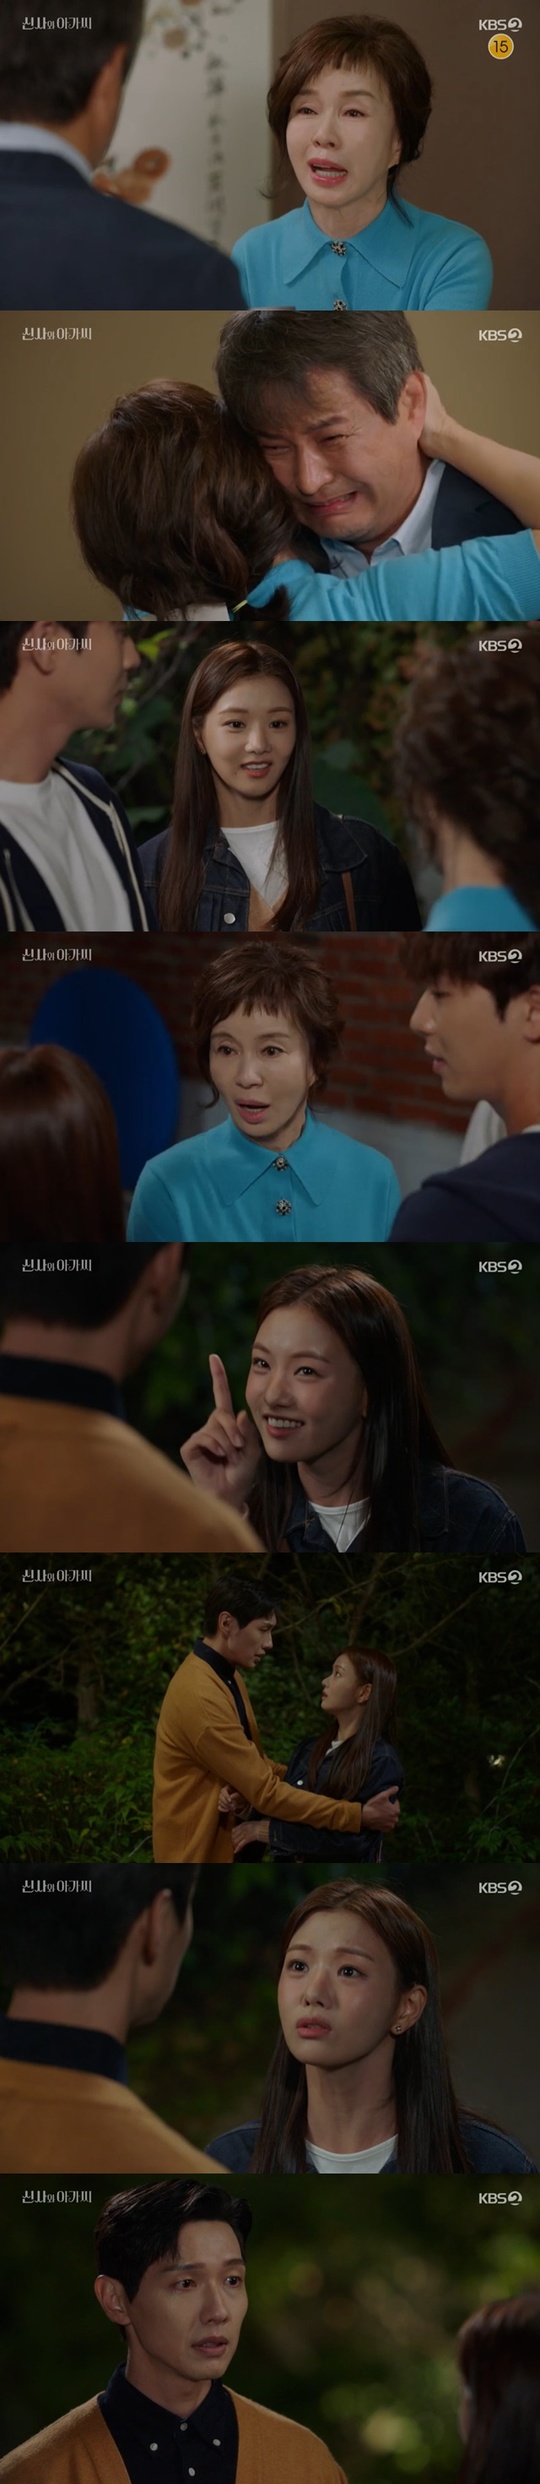 Lee Se-hee made love Confessions to Ji Hyun Woo, and Im Ye-jin Lee Jong-Won Brother and Sister reunited tears.In the 12th KBS 2TV weekend drama Gentleman and Young Lady (playplayed by Kim Sa-kyung/directed by Shin Chang-seok), the relationship between rose-sook (Im Ye-jin) and Lee Jong-Won was revealed.Lee Young-guk (Ji Hyo) and Park Dan-dan (Lee Se-hee) remembered and wondered and felt fateful attraction to the first time they met as soldiers and runaway girls who had gone on vacation in the past.Park said, Is it fate with the president? He must be crazy. How old is the difference?In the meantime, Josara (Park Ha-na) was followed by Lee Young-guk and Park Dan-dan, who were afraid to go to the hotel, but was taken to the hospital after he almost had a traffic accident.Wang Dae-ran (Cha Hwa-Yeon) introduced his daughter Lee Se-ryun (Yoon Jin-i) to a hospital family, and Lee Se-ryun came out against him to win a stake because he marriages.Park Dae-beom knew that Lee Se-ryun had been confronted by an accident with Park Dae-beom (Ahn Woo-yeon) and a chicken skewer truck of Kang Eun-tak.Park Dae-beom received 500,000 won from Lee Se-ryuns face.Lee Se-chan, who was surprised at the lie of Wang Dae-ran and Jo-jae, questioned the reason, but Lee Se-chan did not say, and Park Dan-dan, who was accused of stealing, ran out in tears.Lee Yeong-guk went out to find Park Dan-dan, and Ana Kim (Lee Il-hwa) confronted Wang Dae-ran, who had framed his own daughter, Park Dan-dan, with Furious, saying, Have you just been treating your people so far?Lee Yeong-guk was able to feel free by riding Park Dan-dan on a bicycle.That night, Lee Se-chan took revenge by putting a toy snake in the bed of Wang Dae-ran, and when Lee Young-guk asked why, he confessed that he saw Wang Dae-ran hiding his necklace in the room of the beat.Lee Se-chan said he could not tell the kings name because he was embarrassed, and Lee Young-guk asked the king, How can you do that?So Wang Dae-ran suddenly pretended to be crazy, saying, It was like Kyung-sook, who was your father.Anna Kim recommended Lee Young-guk to test for dementia by Wang Dae-ran and met Lee Jong-won and said he wanted to take Park Dan-dan to the United States.In the meantime, Shin Dal-rae (Kim Young-ok) and Cha Yeon-sil (Oh Hyun-kyung) and their mother and daughter performed genetic tests of Park Soo-cheol and rose-sook (Im Ye-jin), and the two were hit between Brother and Sister.Rose-sook Park Soo-cheol Brother and Sister embraced tears, and rose-sook came to Park Soo-cheols house and met Park Dae-beom and Park Dan-dan.